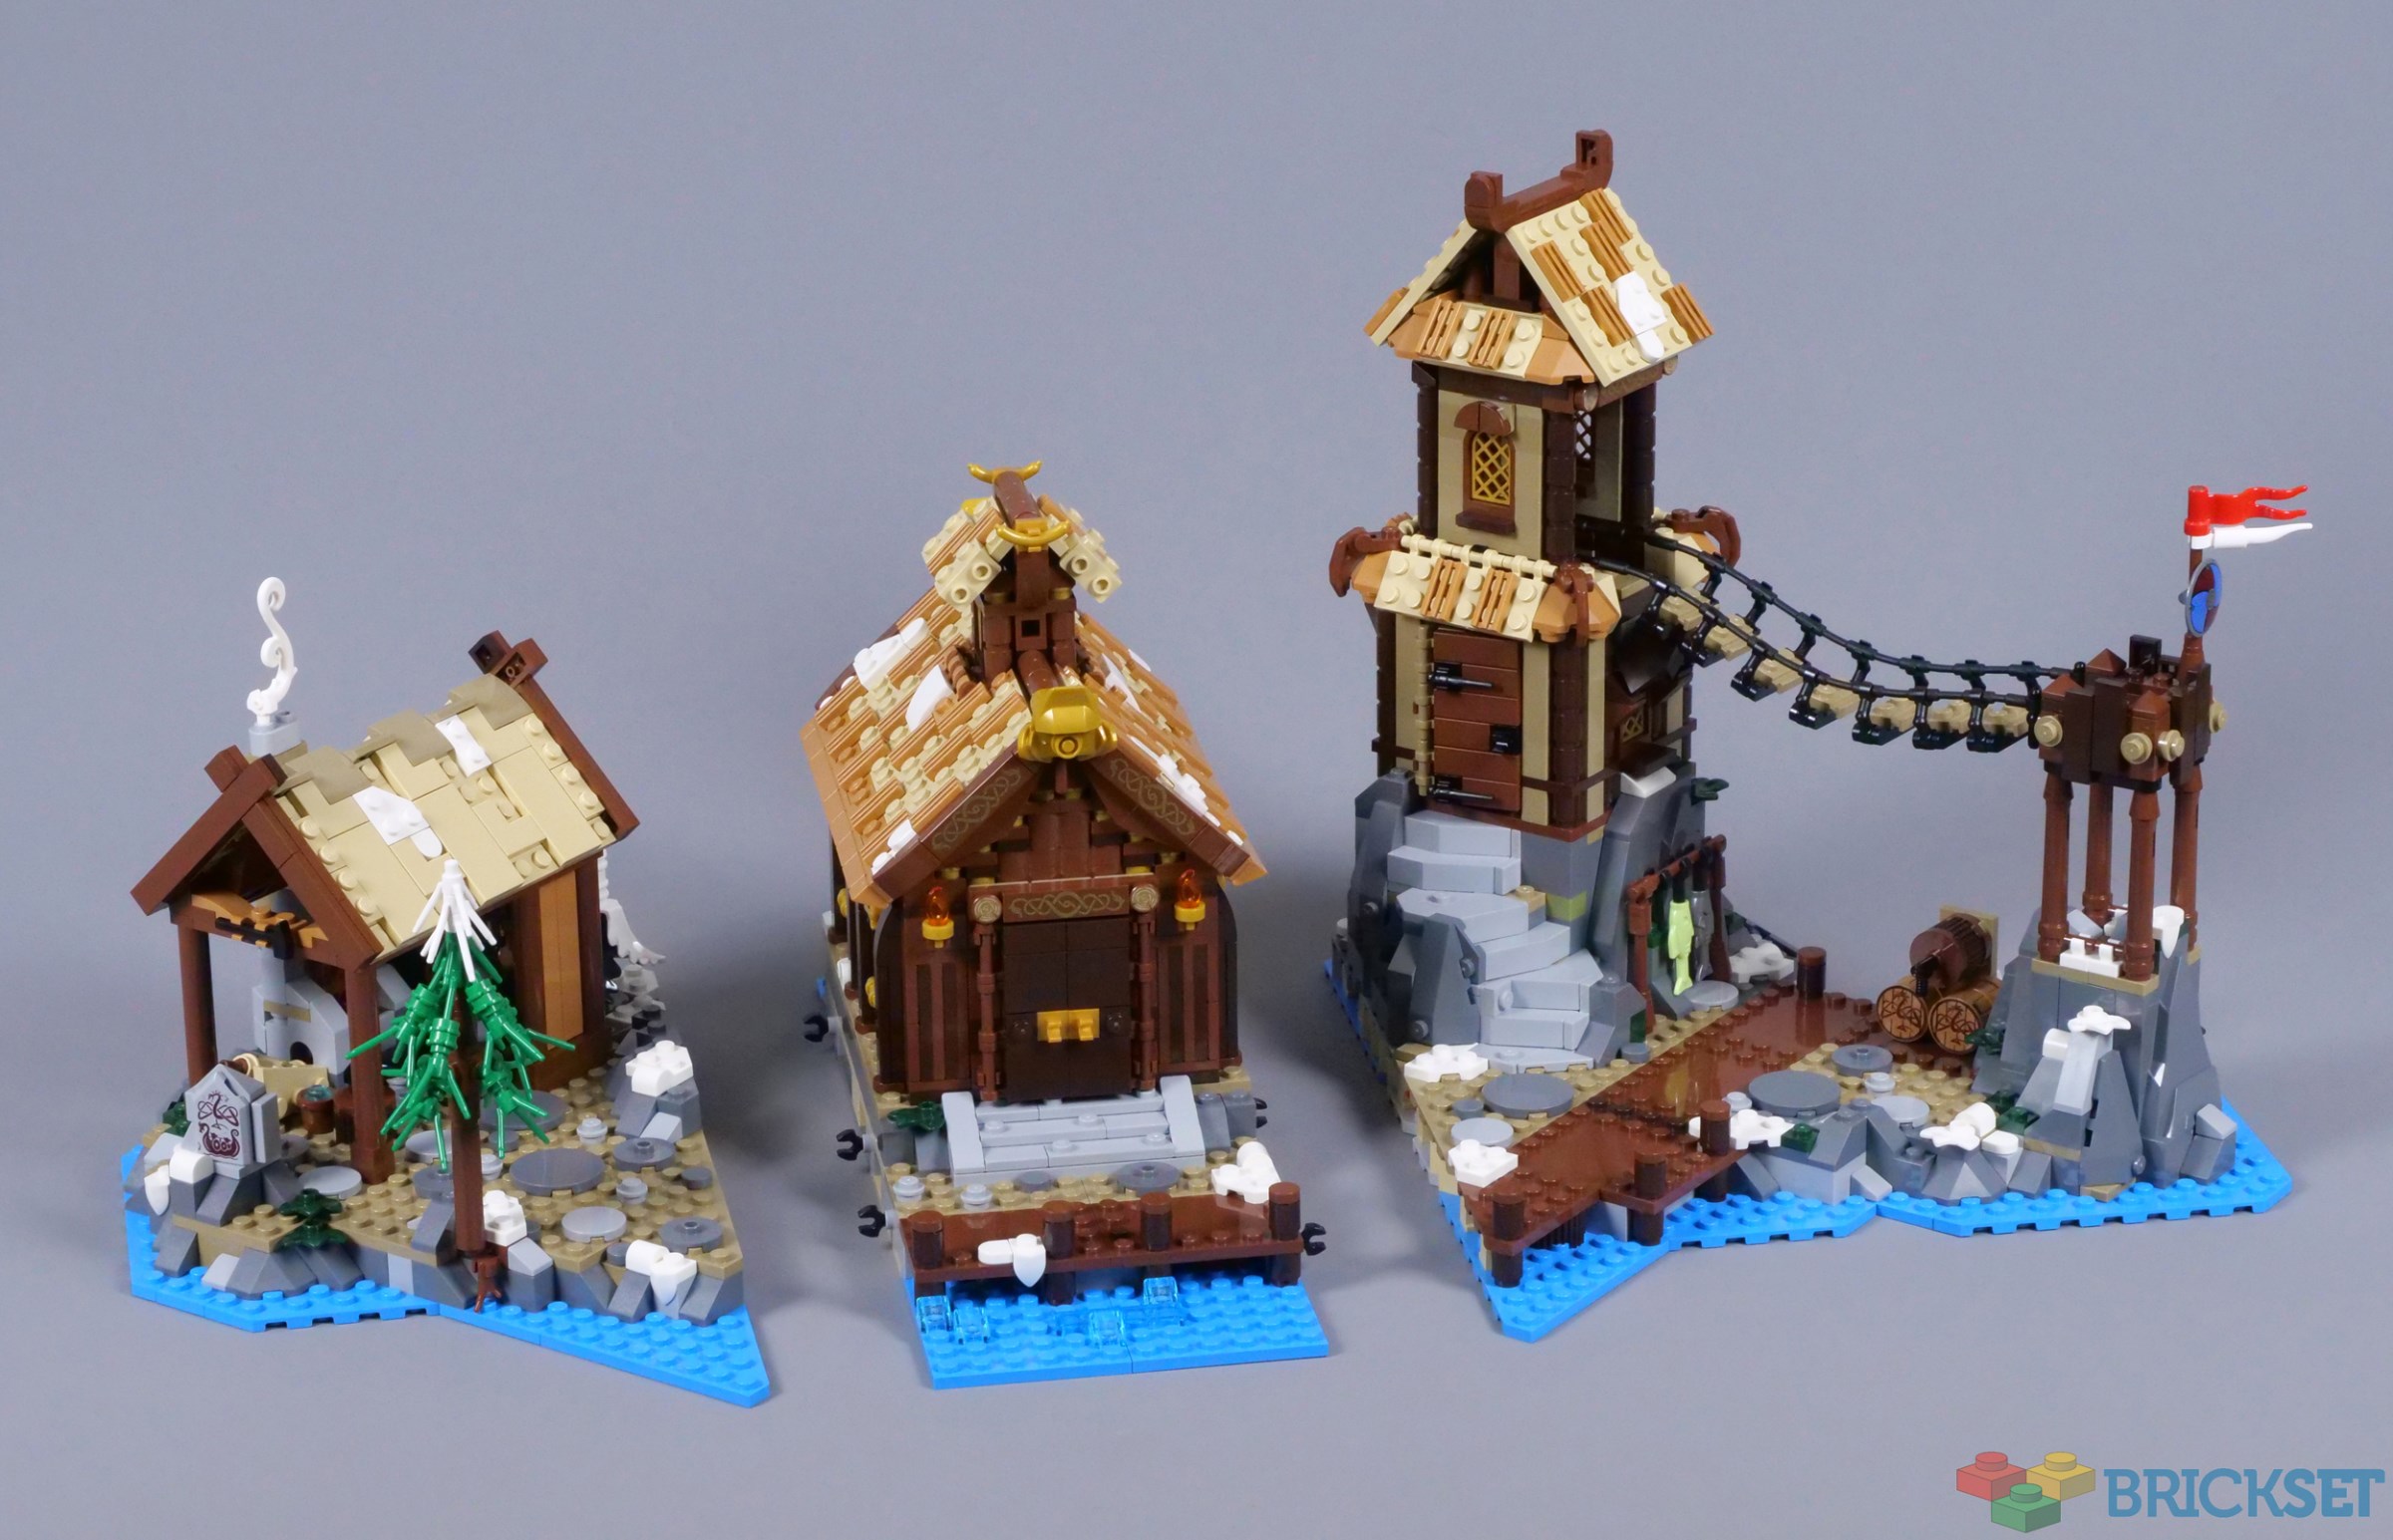 You'll Need To Dig Deep For This Insane Lego Minecraft Set